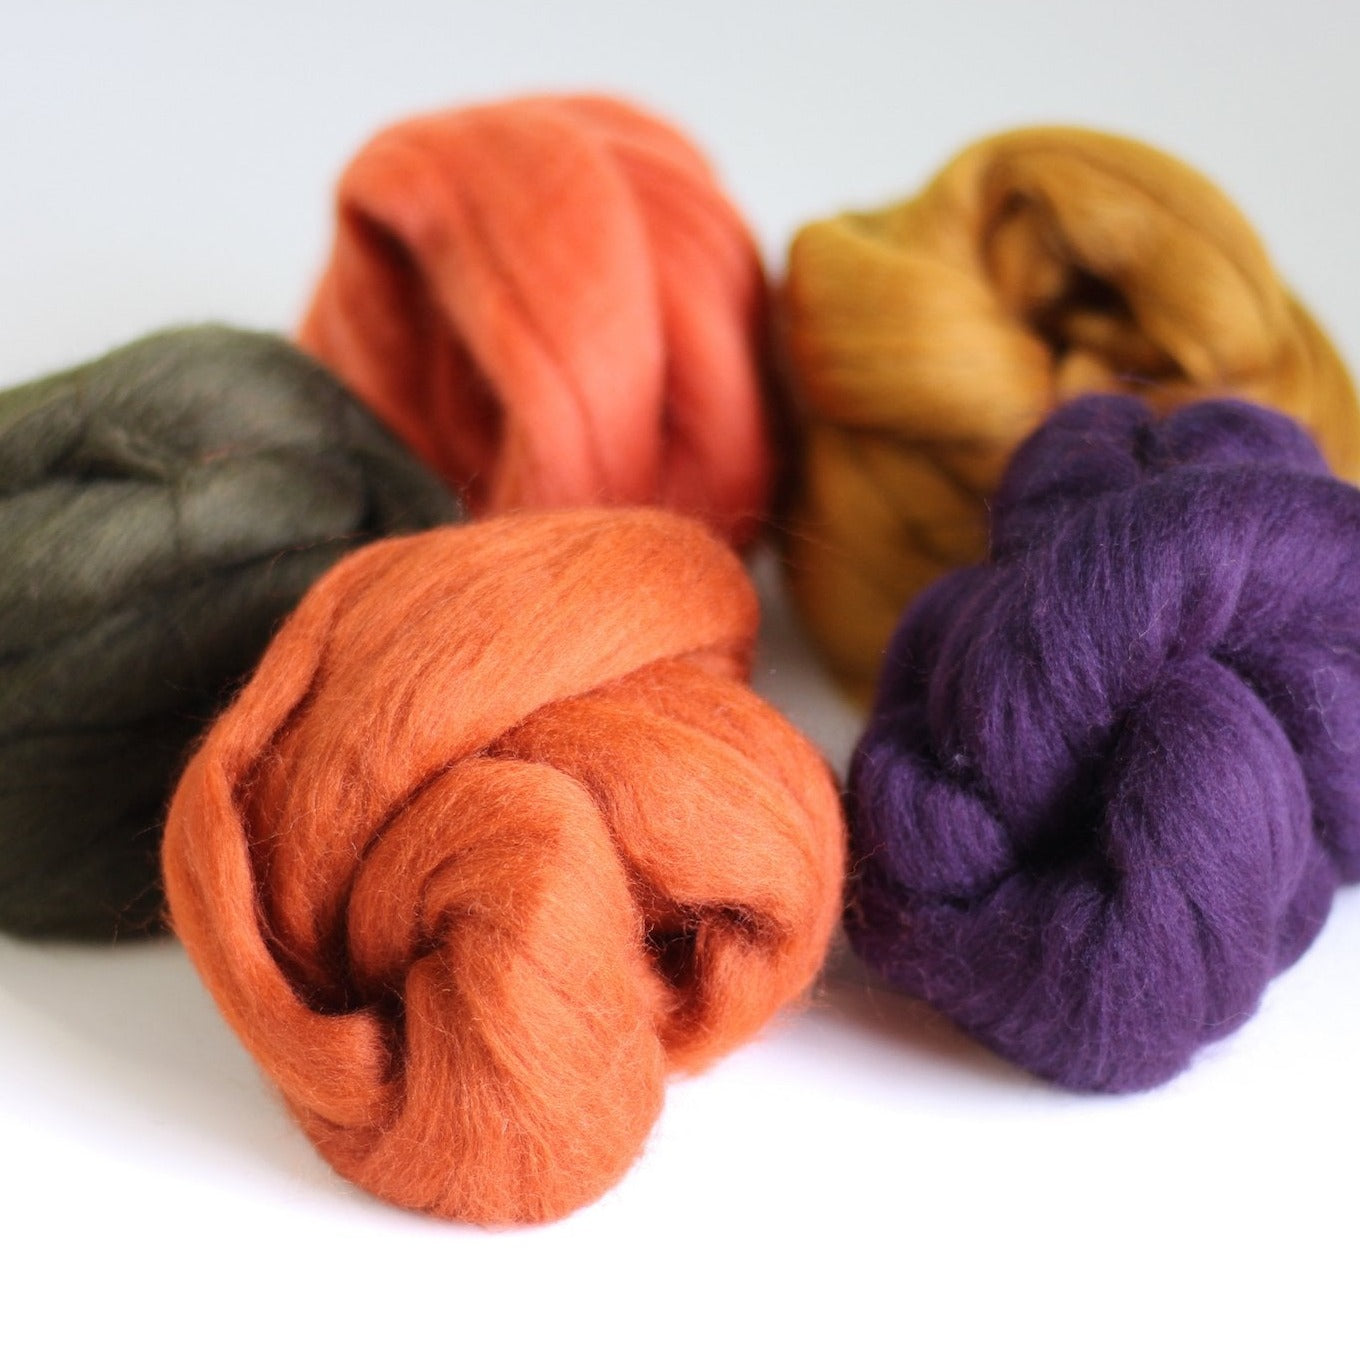 Autumn wool bundle from another angle on a white background.